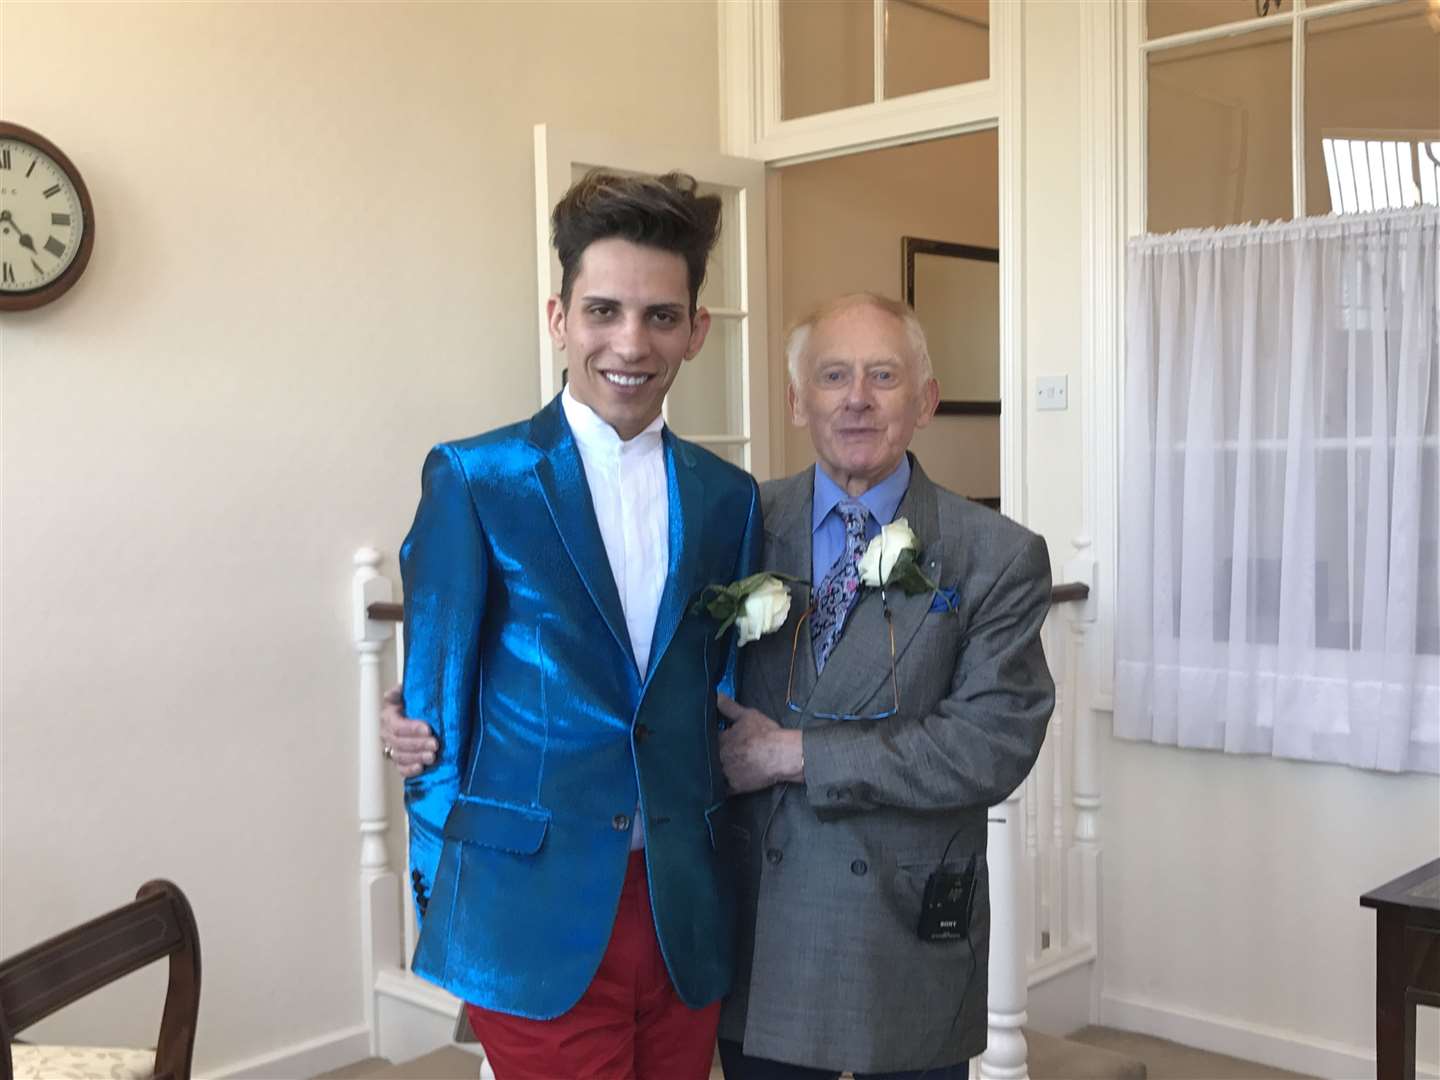 Florin Marin and Philip Clements on their wedding day in April 2017